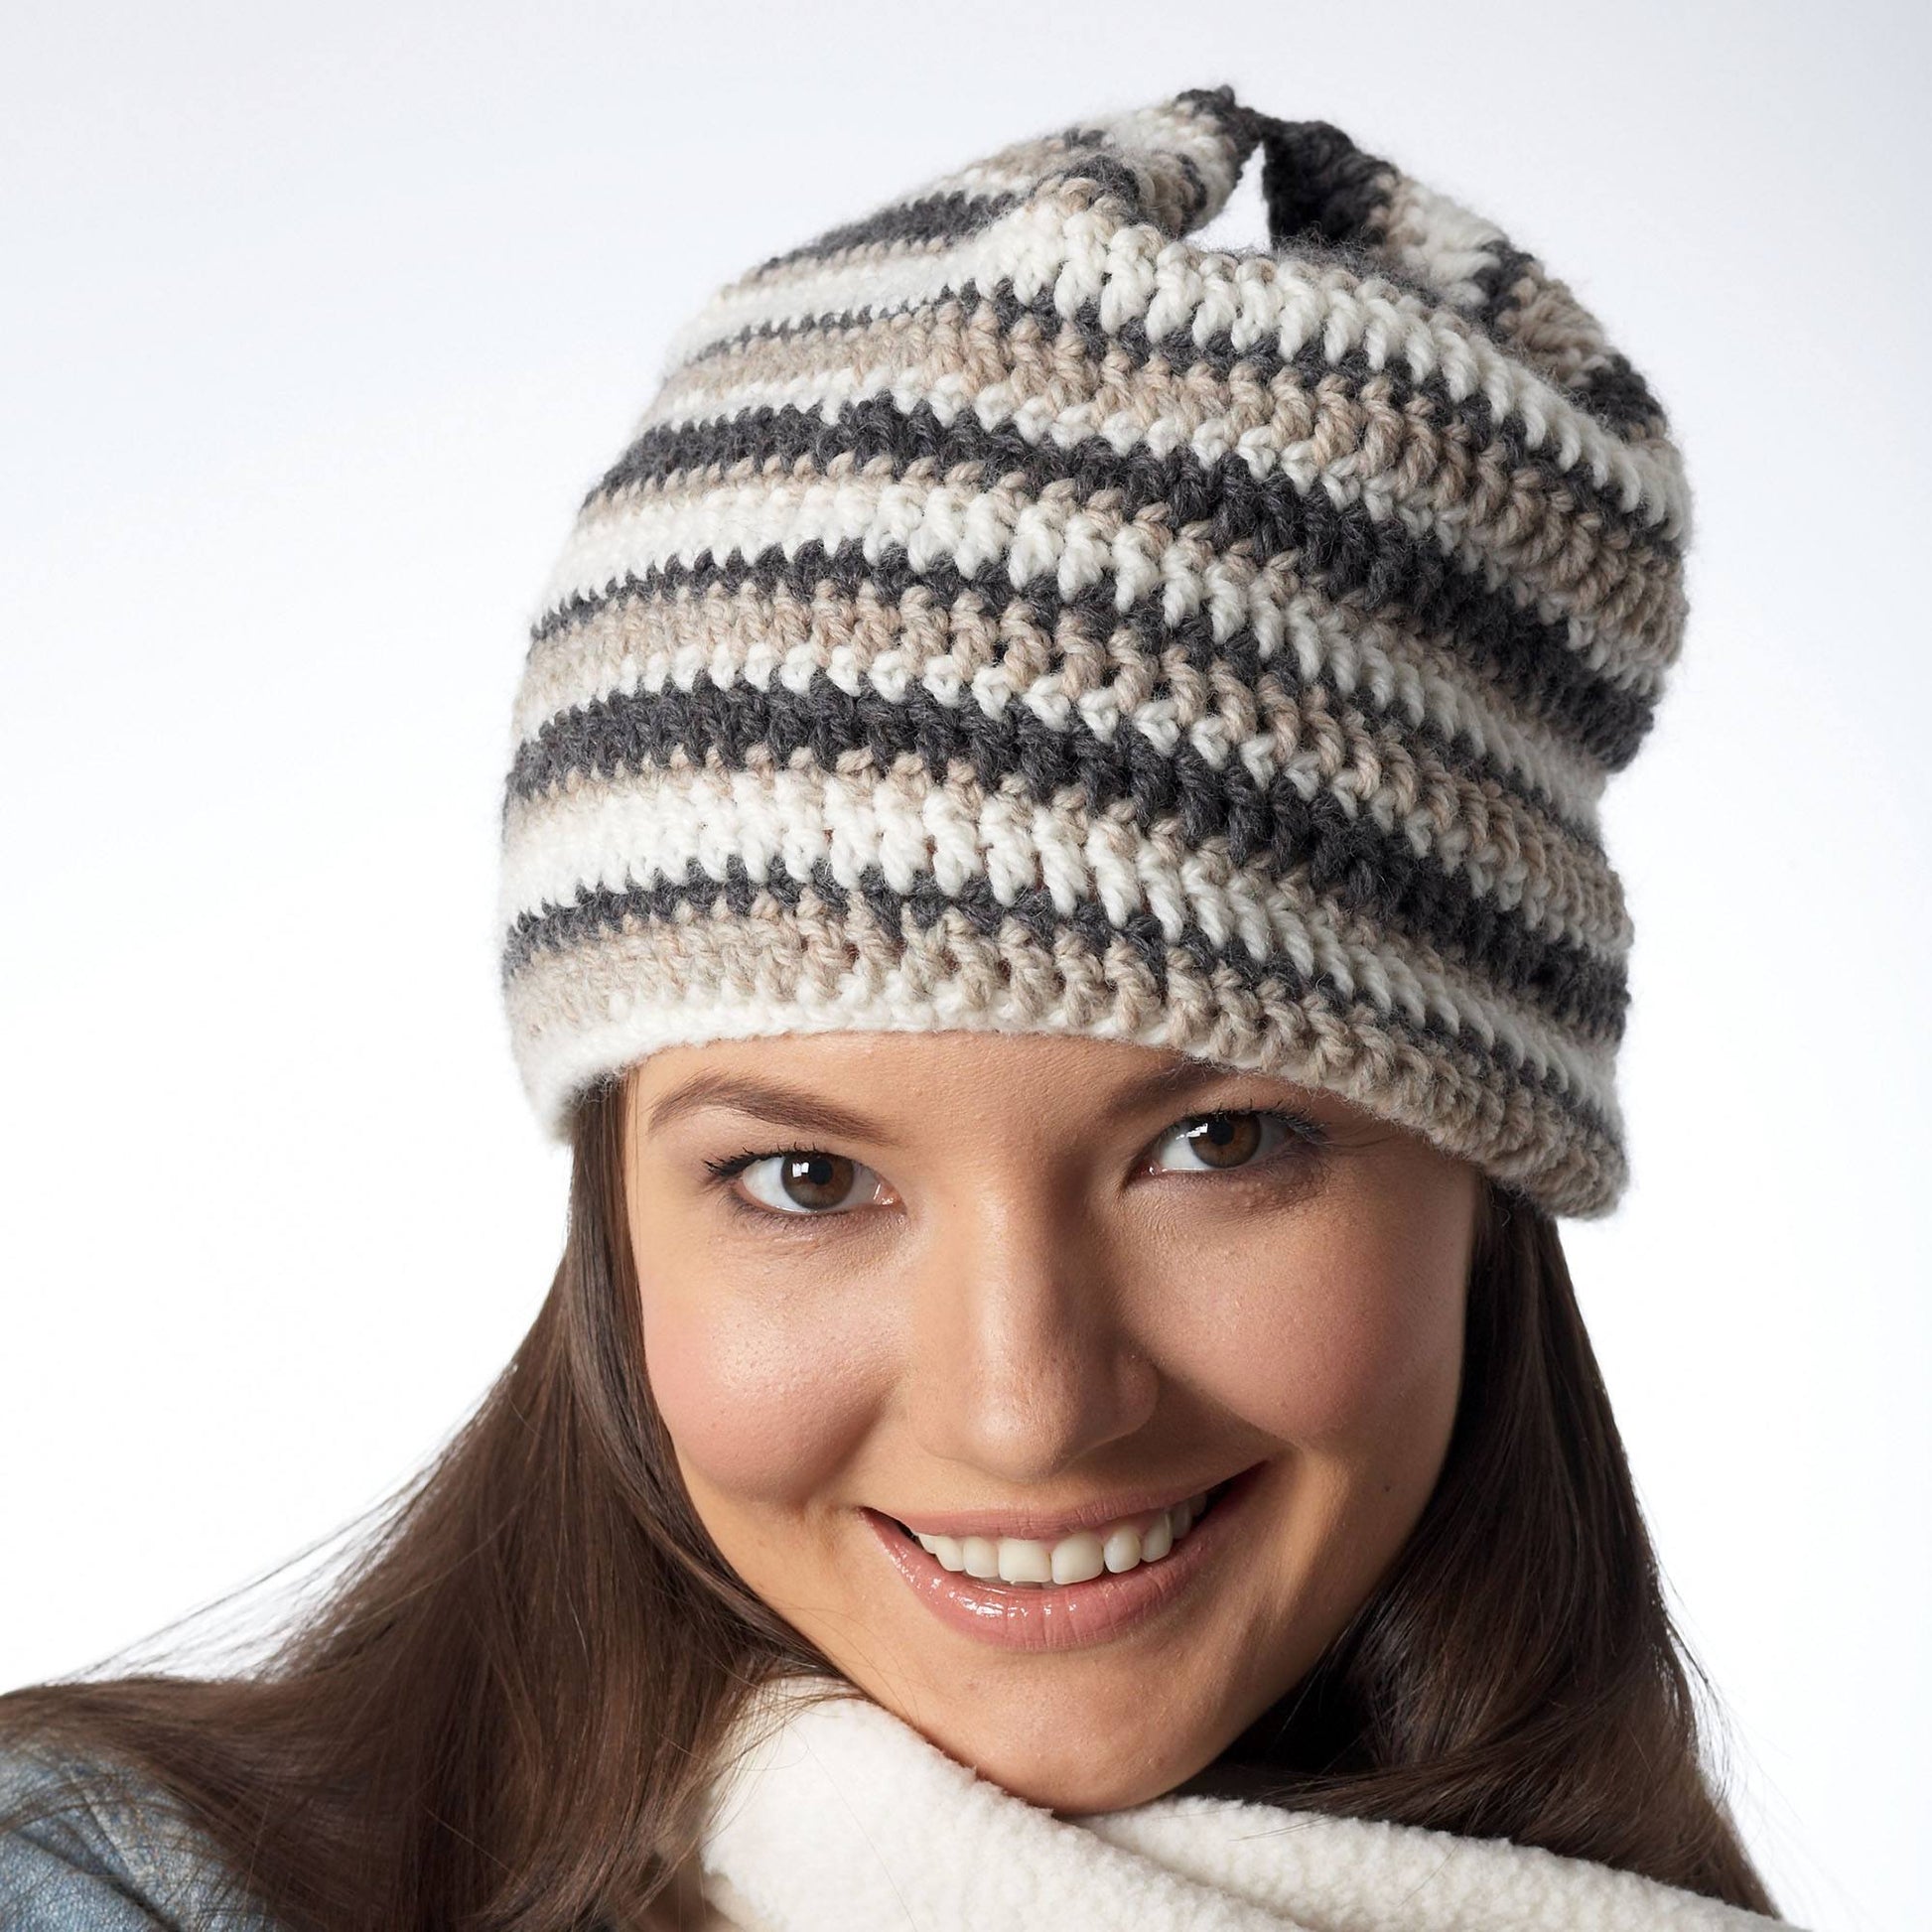 Patons Laura's Striped Crochet Hat Patons Laura's Striped Crochet Hat